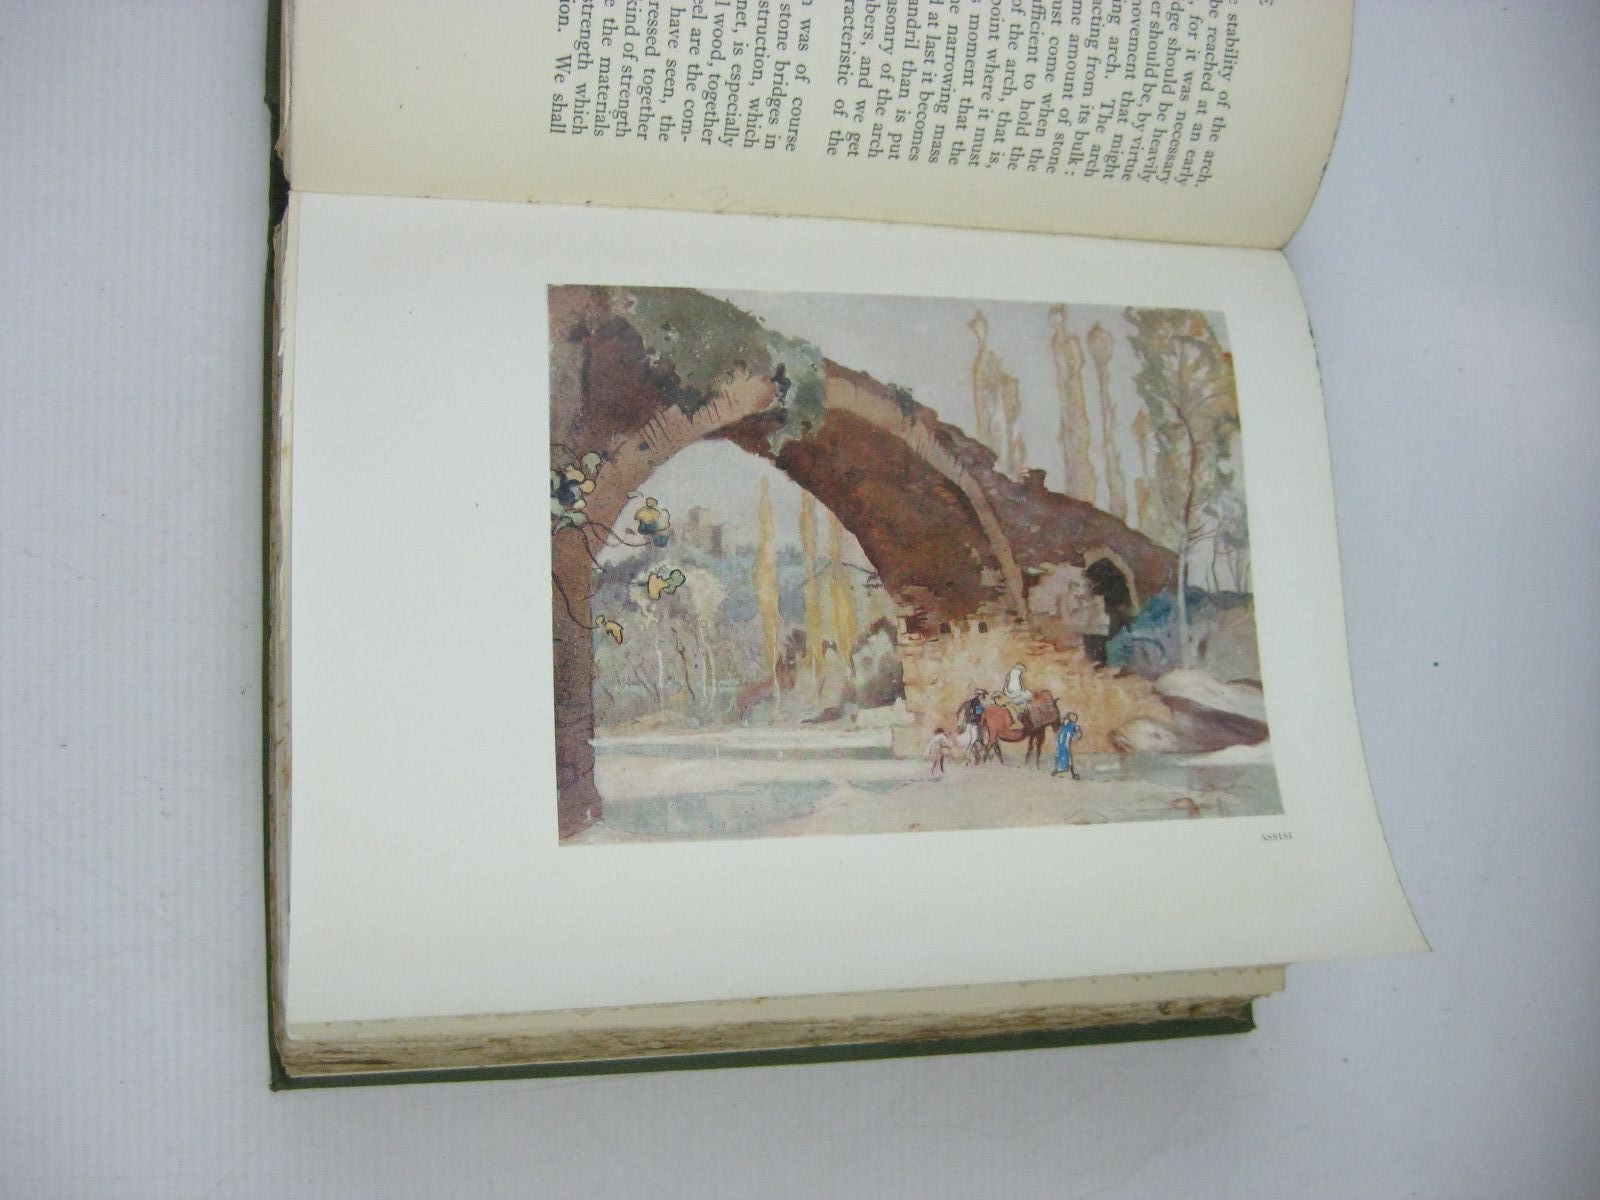 Photo of THE BRIDGE written by Barman, Christian illustrated by Brangwyn, Frank published by John Lane The Bodley Head Limited (STOCK CODE: 1504503)  for sale by Stella & Rose's Books